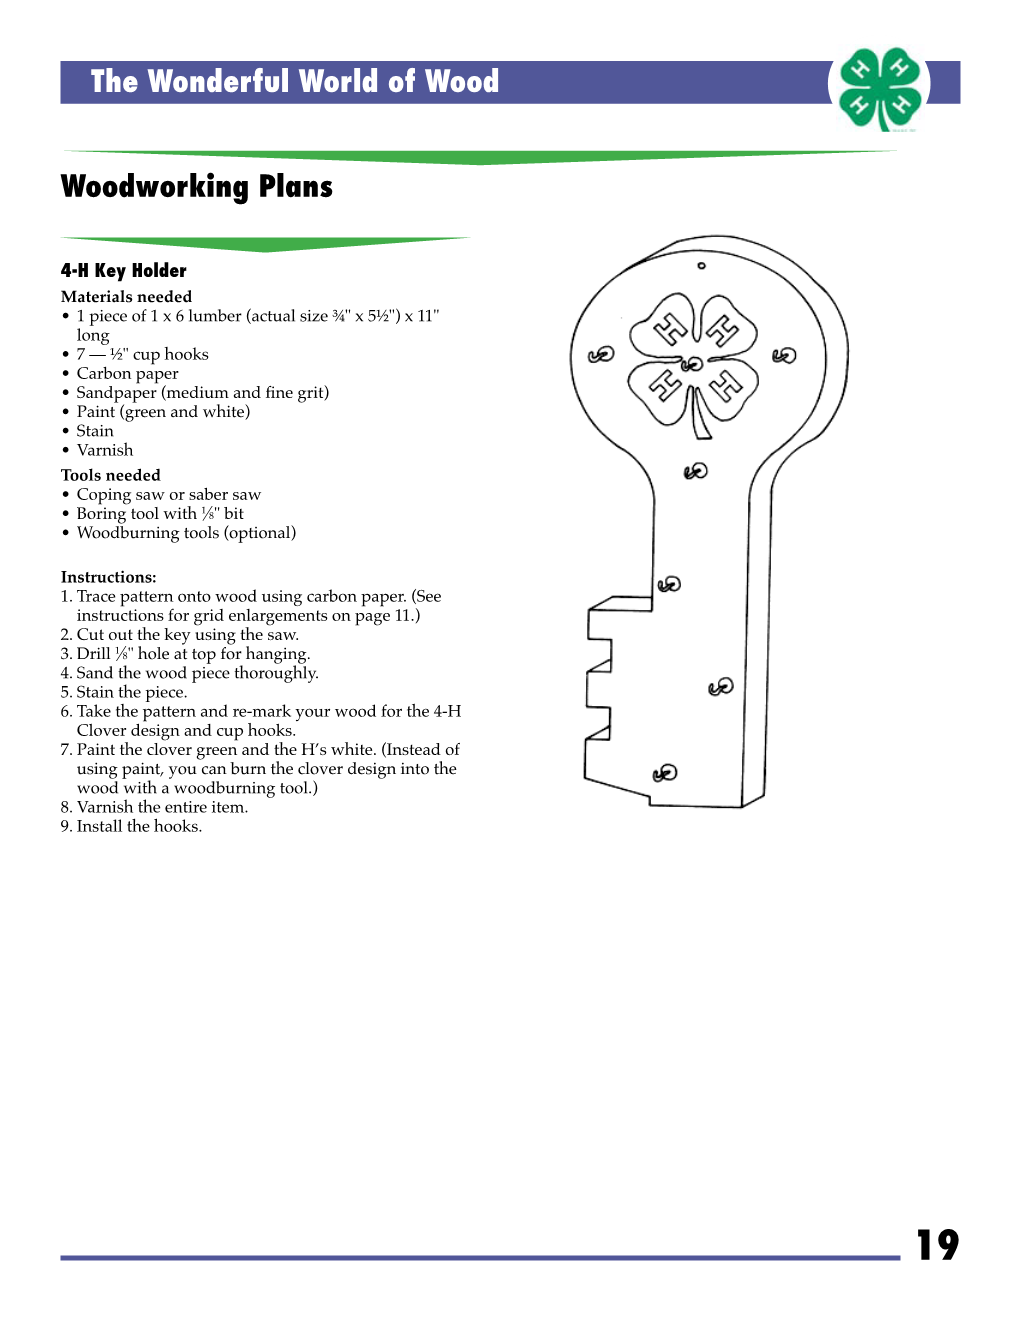 The Wonderful World of Wood Woodworking Plans